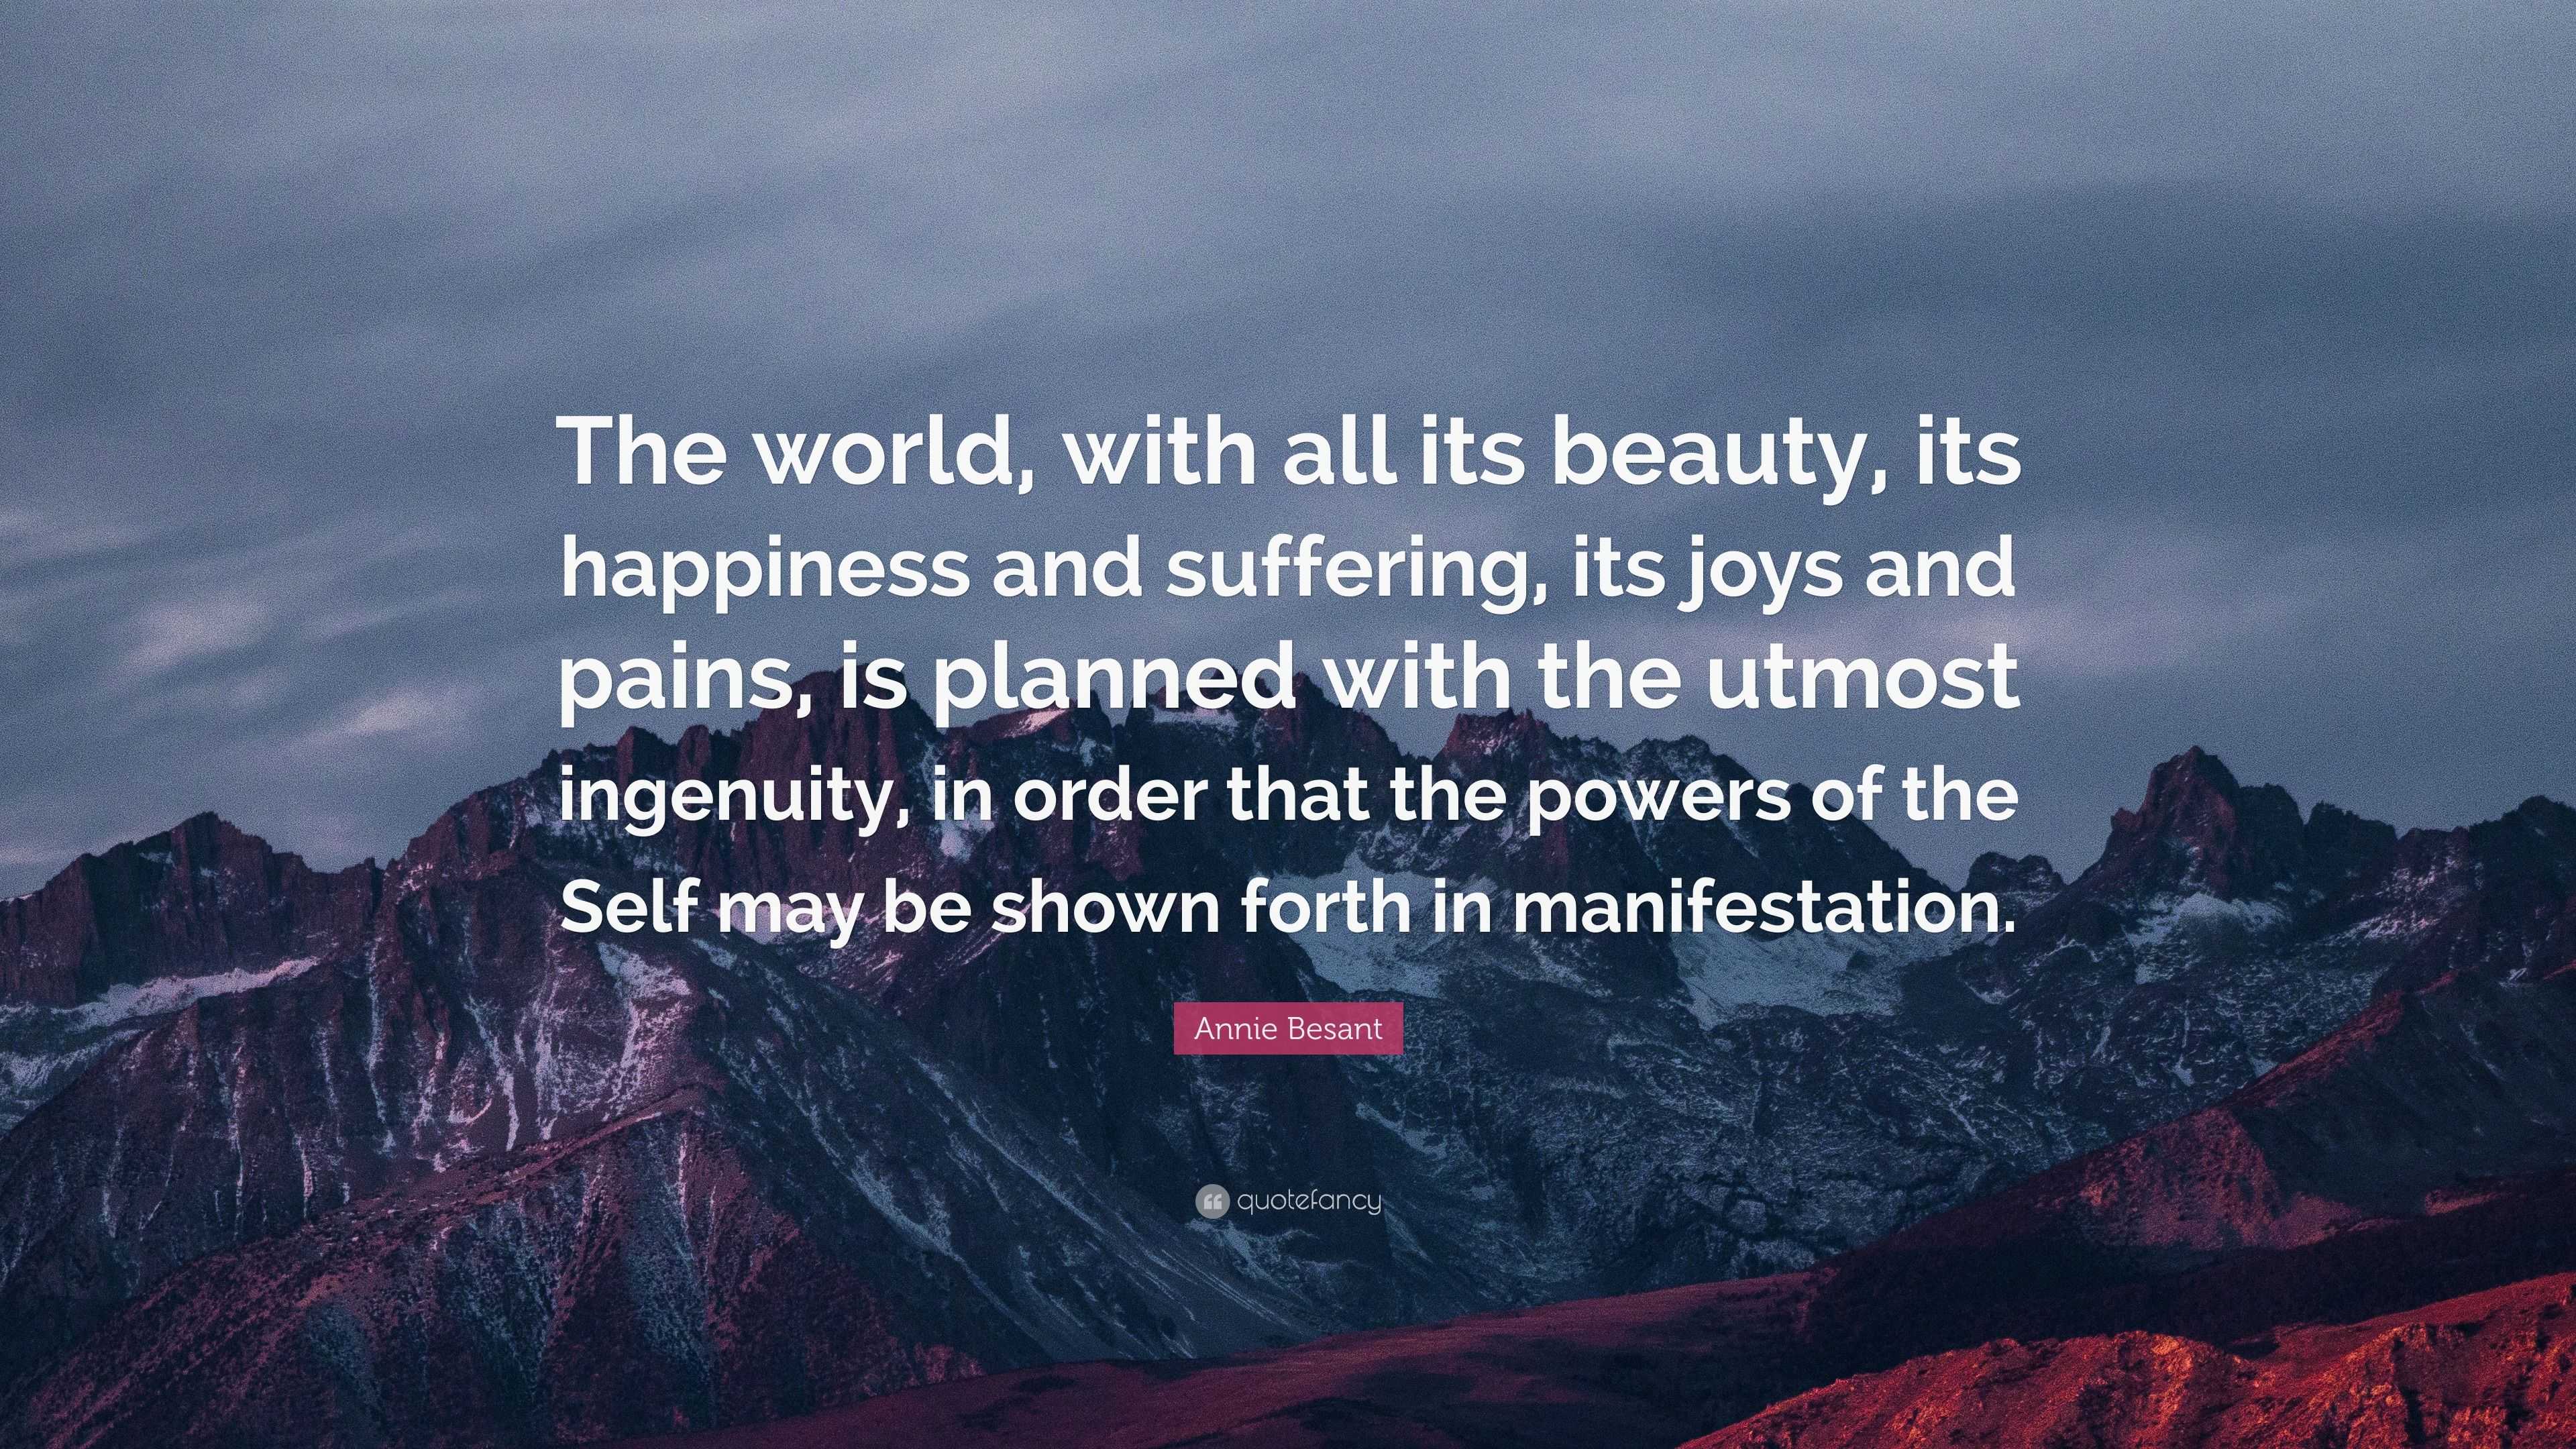 Annie Besant Quote: “The world, with all its beauty, its happiness and ...